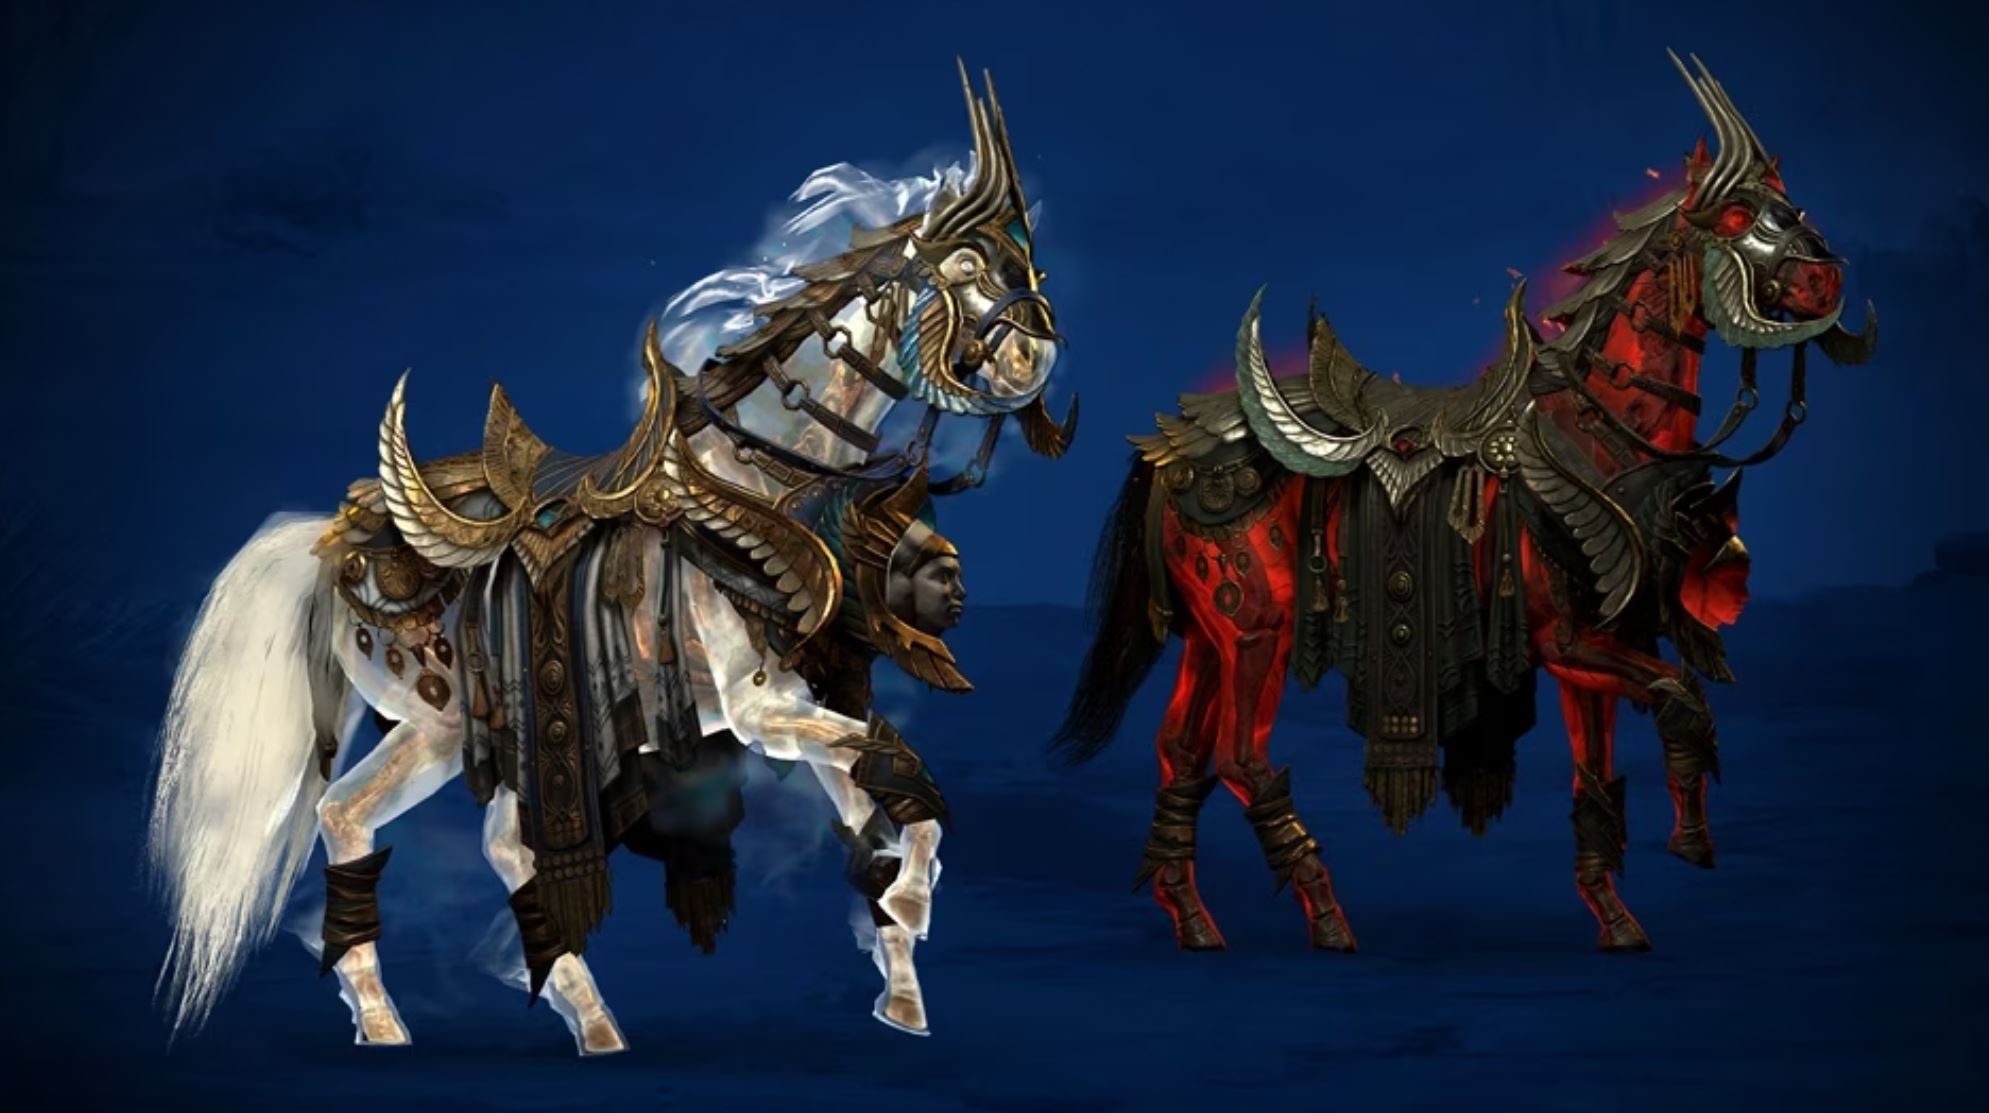 All Season 4 Battle Pass Cosmetics: Weapons, Armor, Mounts, Emotes and More